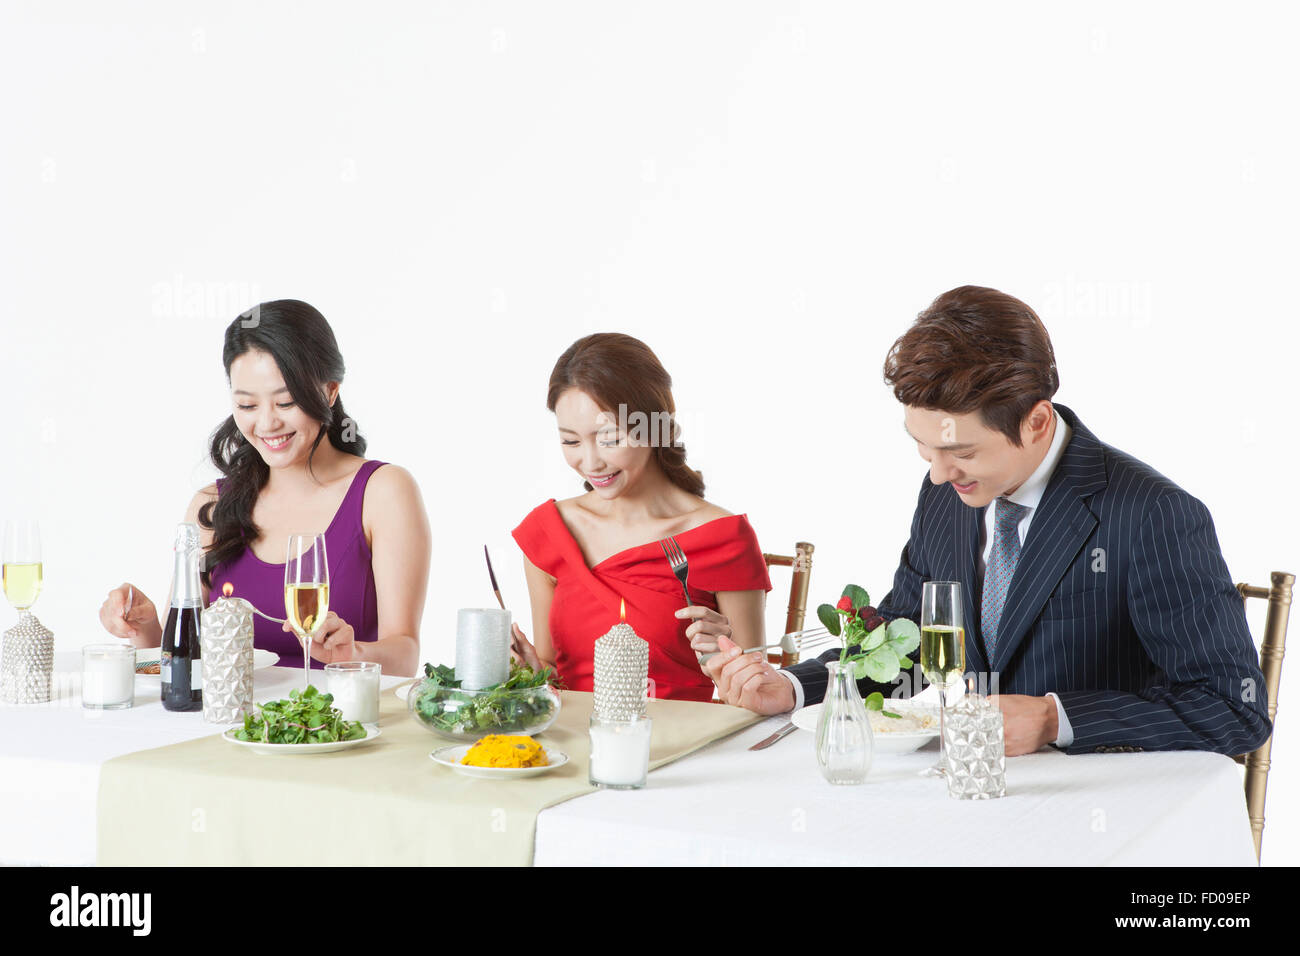 Three adults seated at table being ready to eat enjoying a party Stock Photo